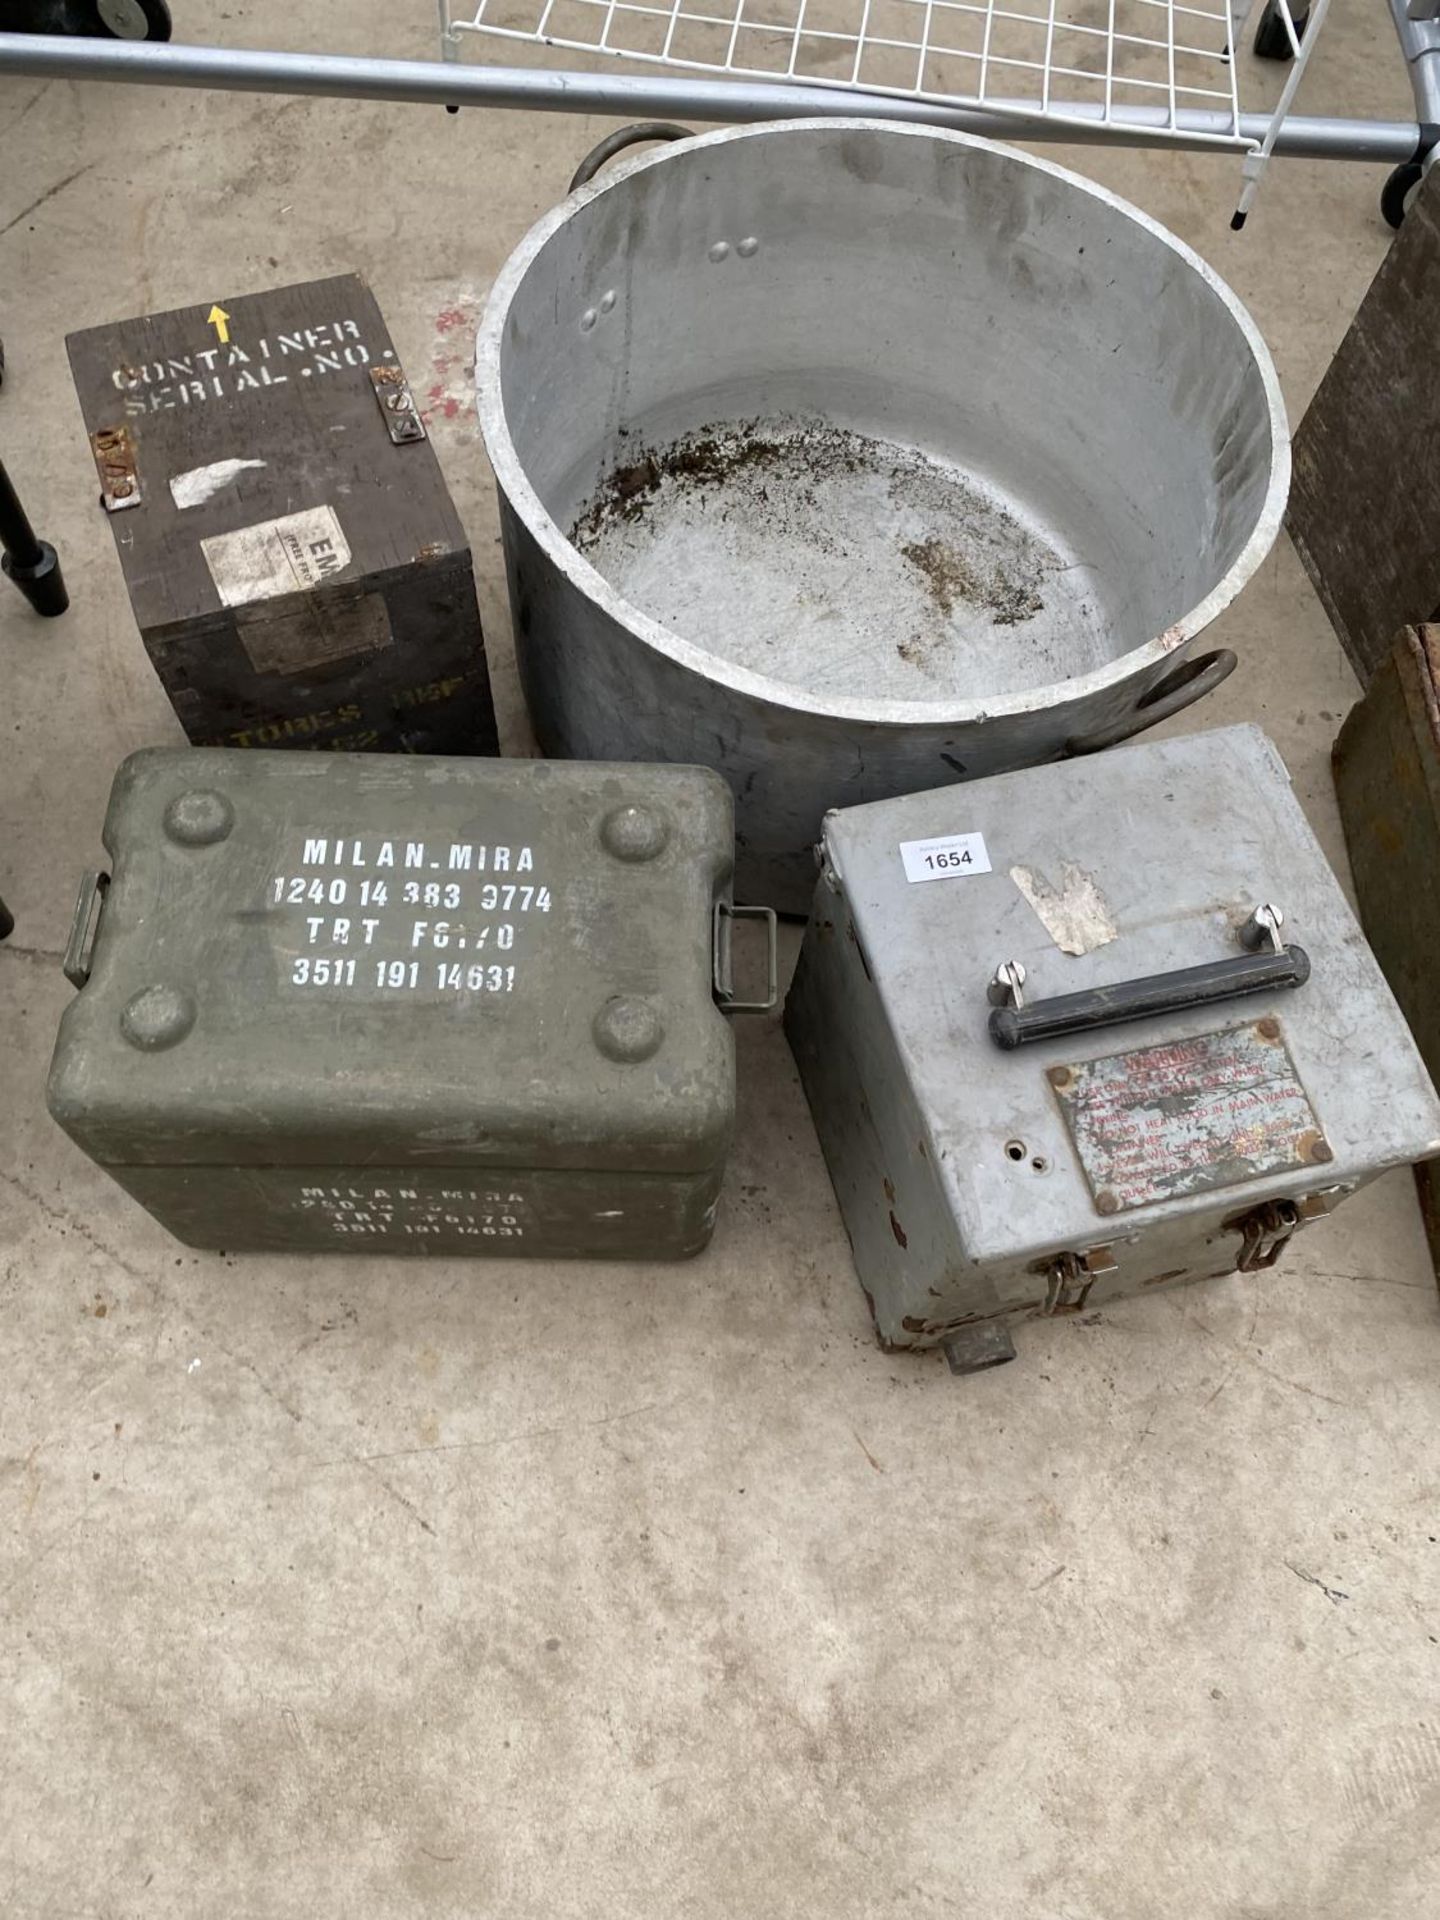 THREE MILITARY STORAGE BOXES AND A COOKING POT